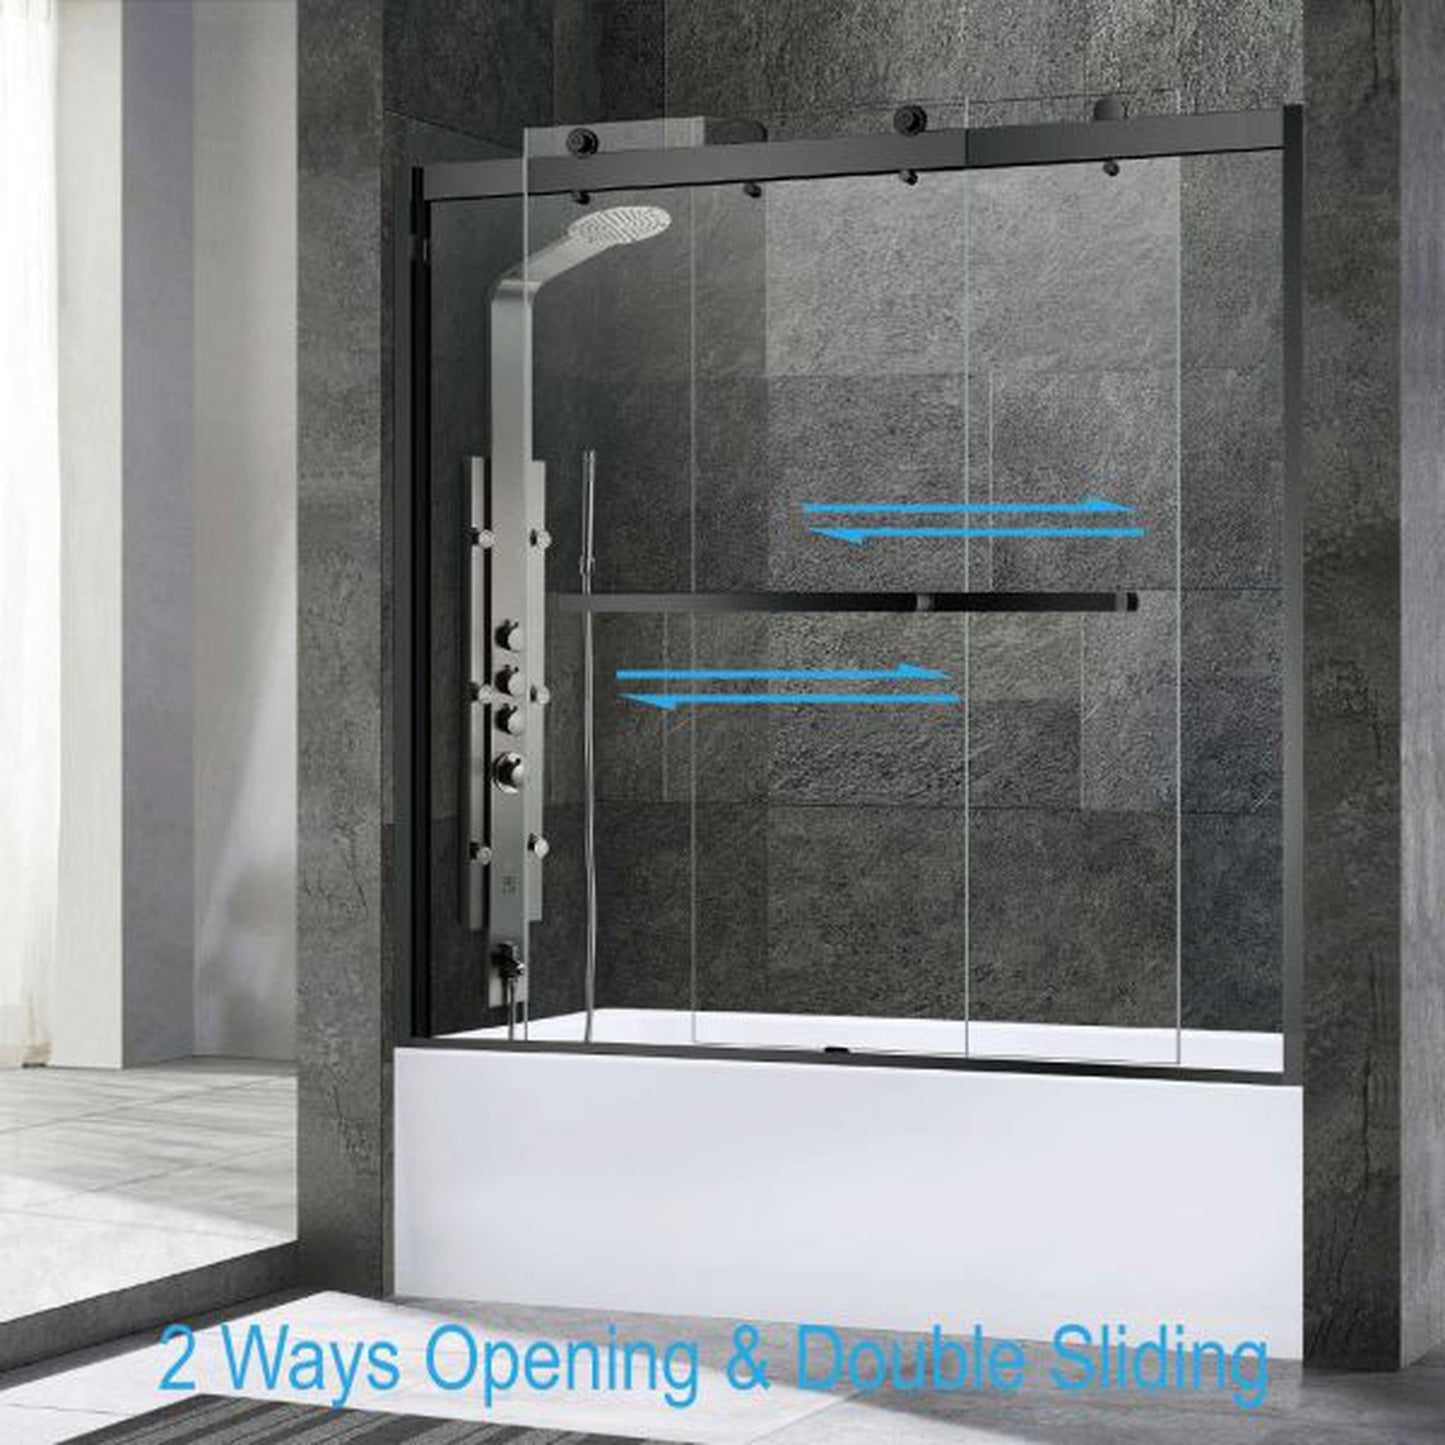 WoodBridge 60" W x 62" H Clear Tempered Glass 2-Way Opening and Double Sliding Frameless Shower Door With Matte Black Hardware Finish